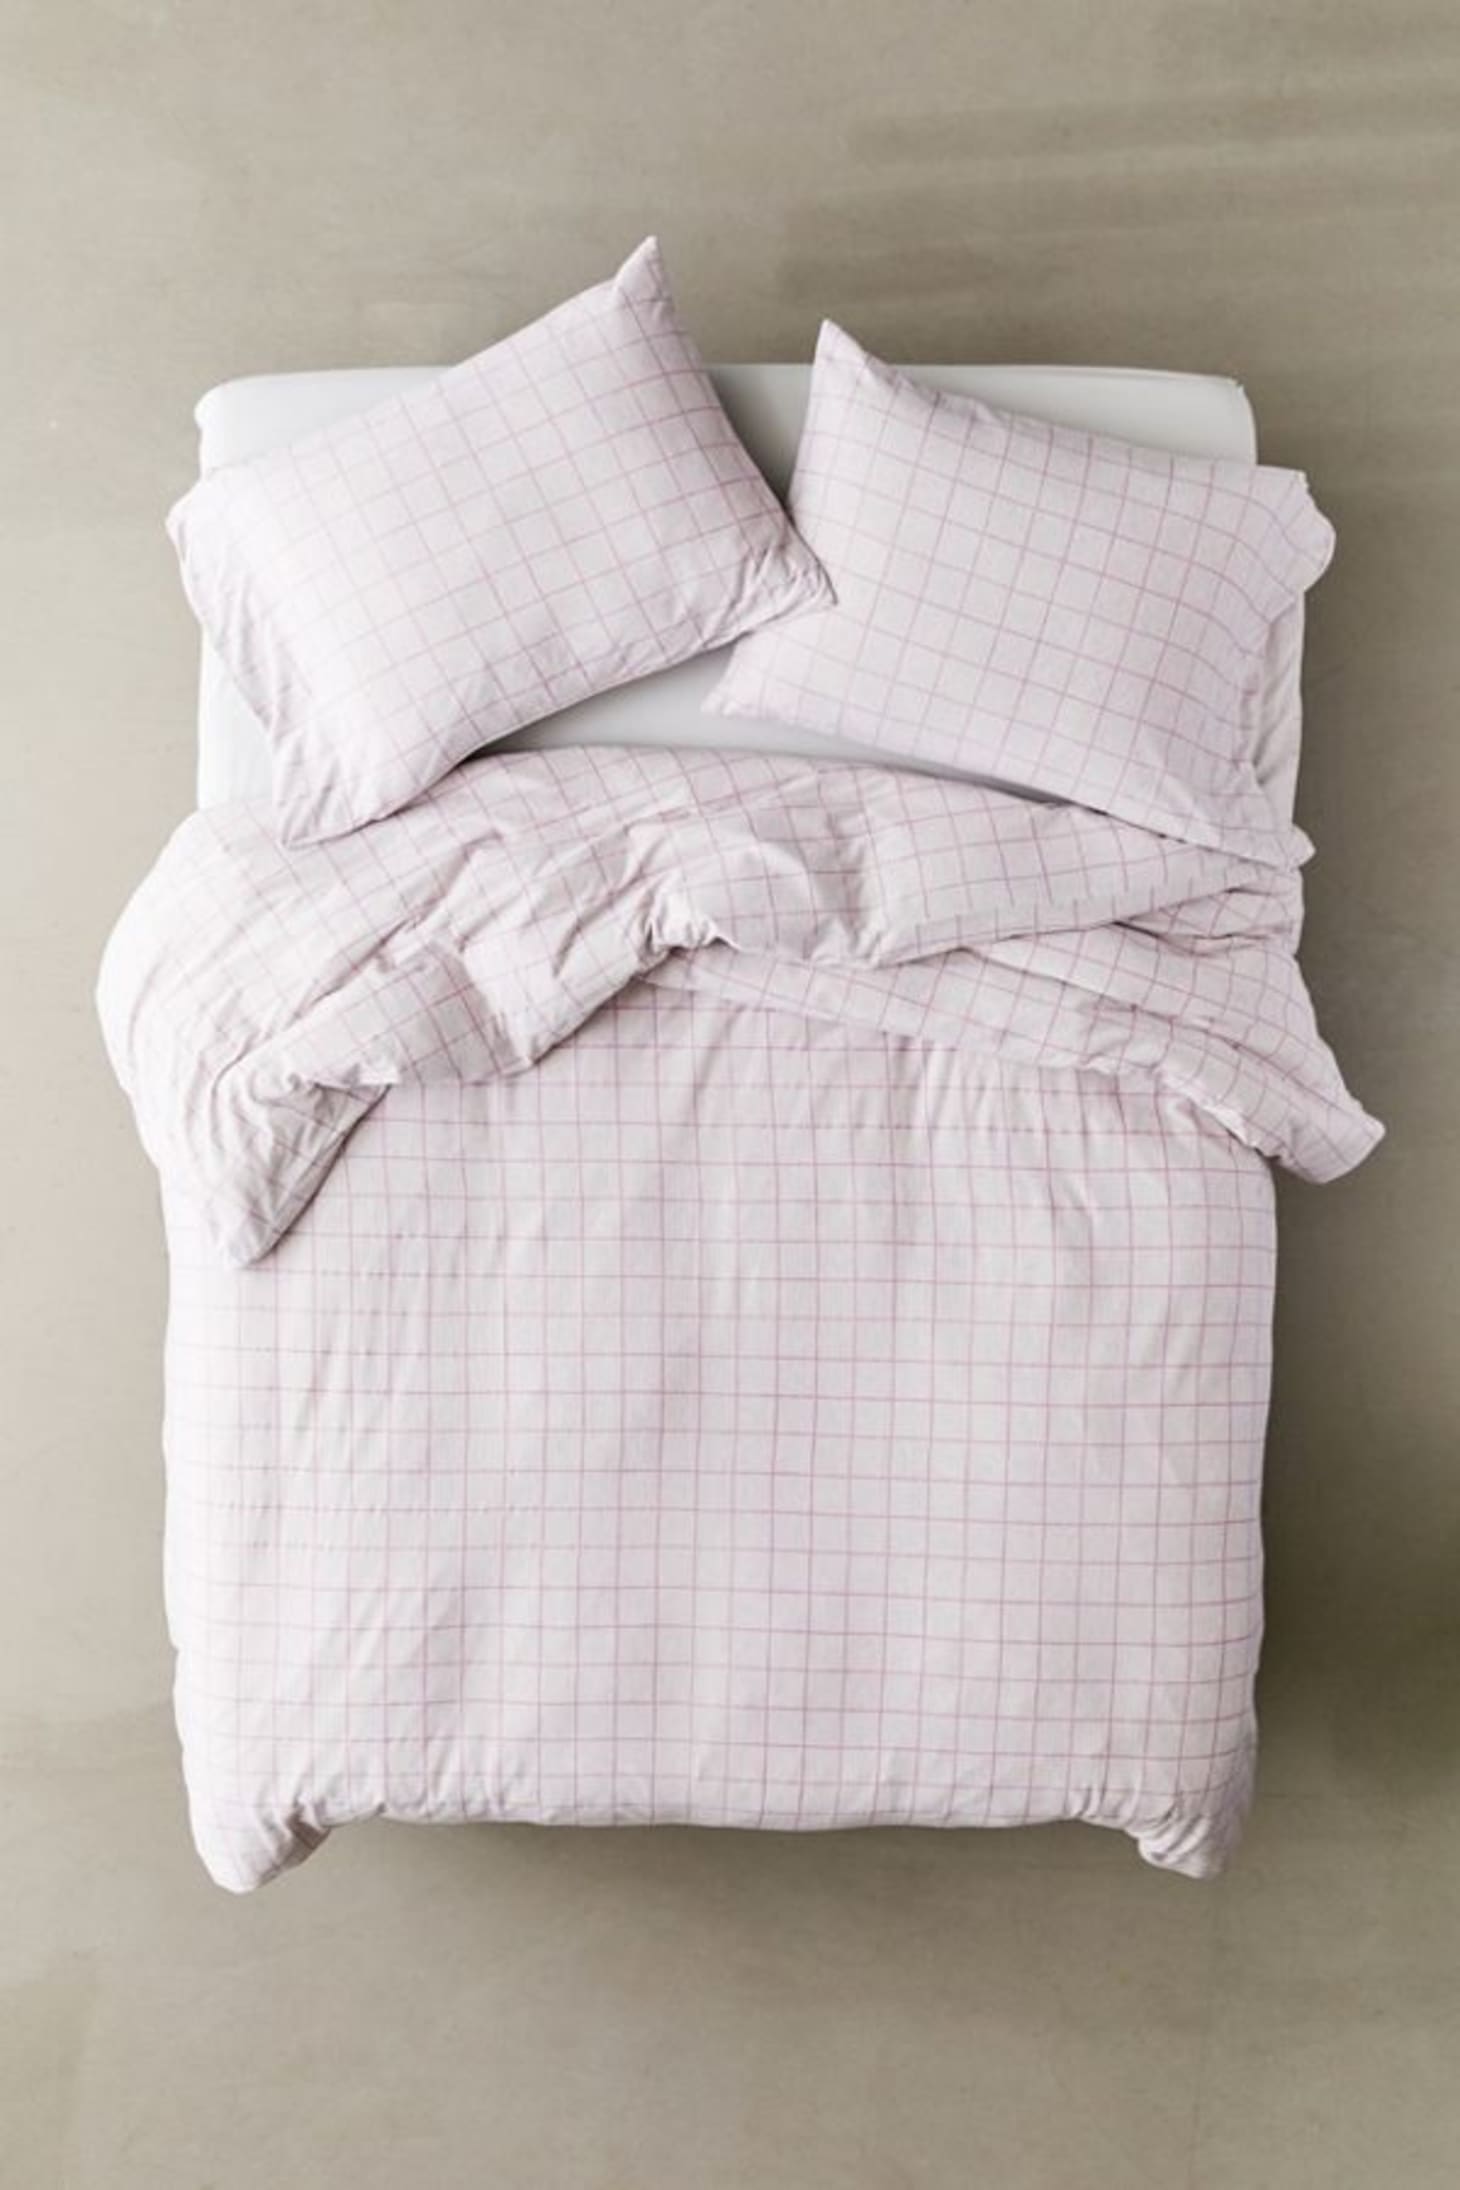 Urban Outfitters Bedding Sale December 2019 Apartment Therapy